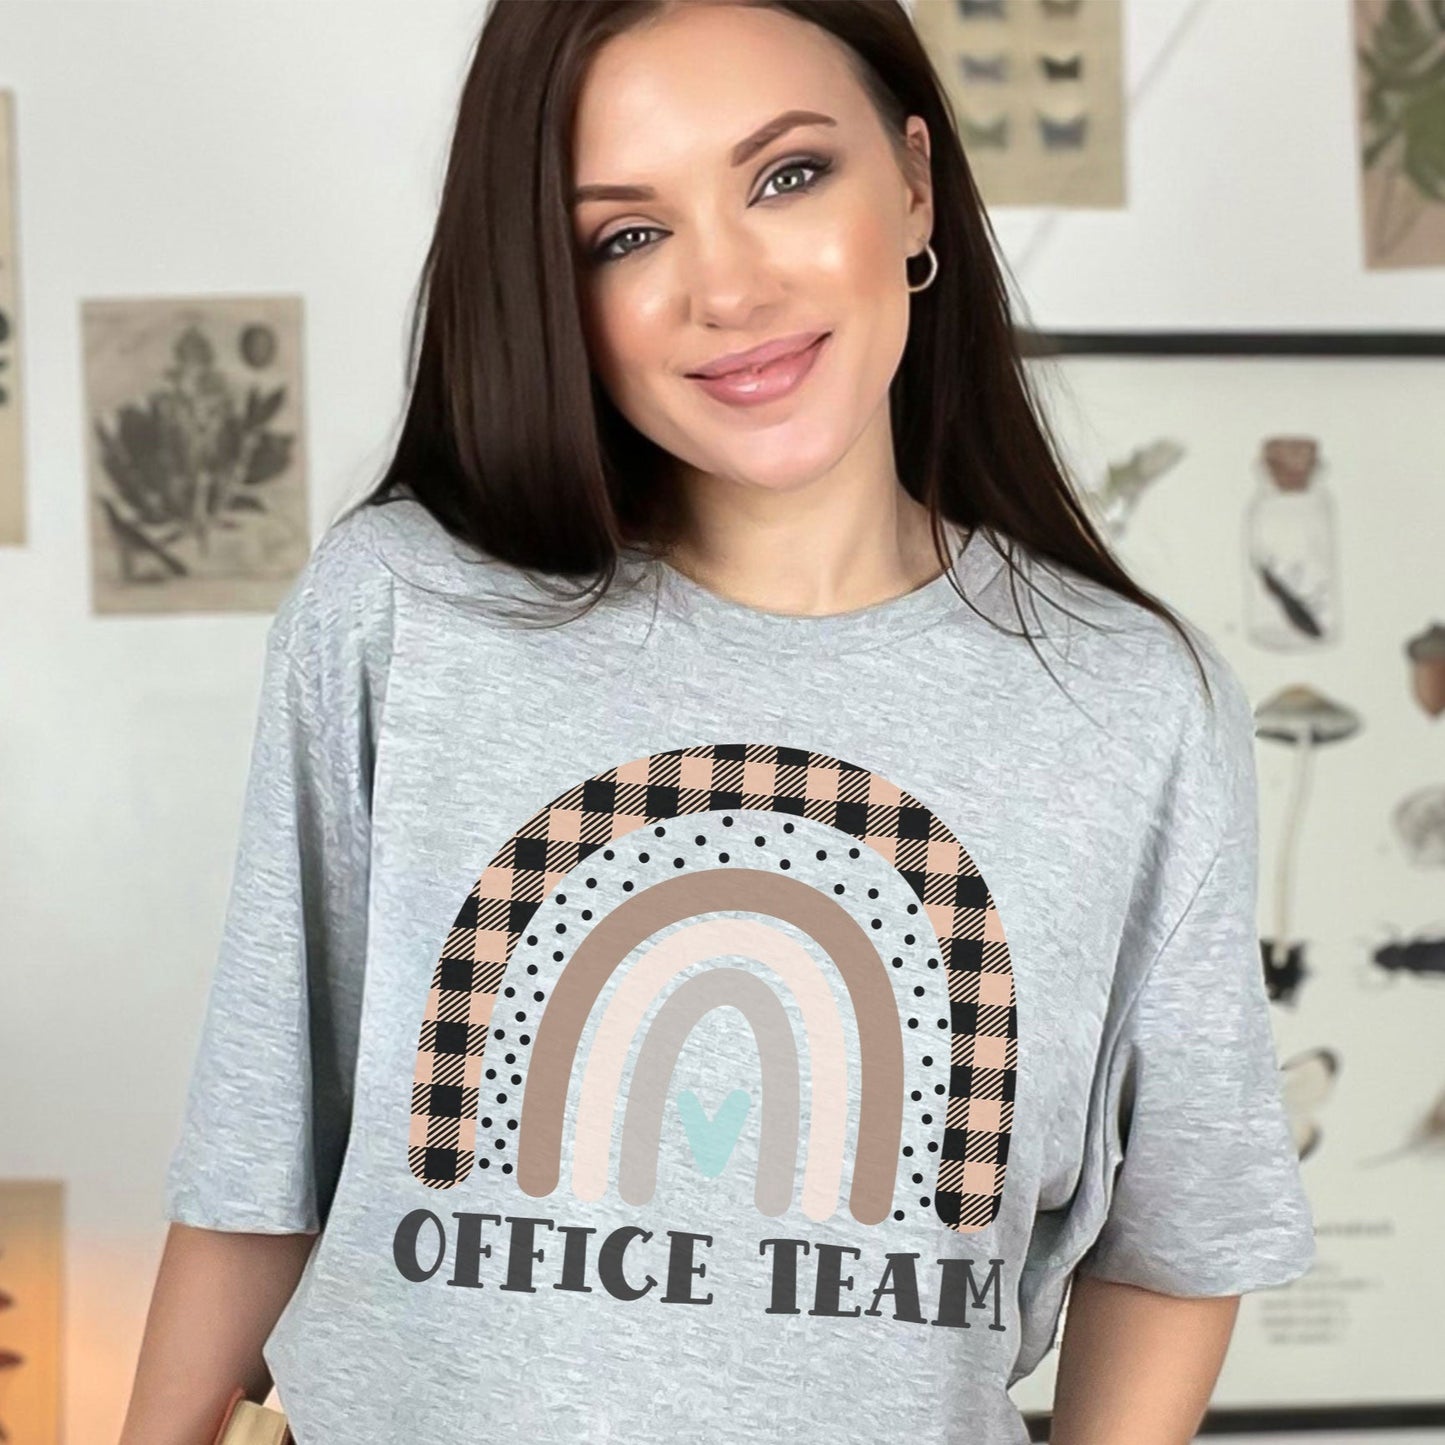 Office Team Shirt, Front Office Lady Sweatshirt, Office Manager, School Secretary Ladies Sweater, Administrative Assistant, Receptionist Tee